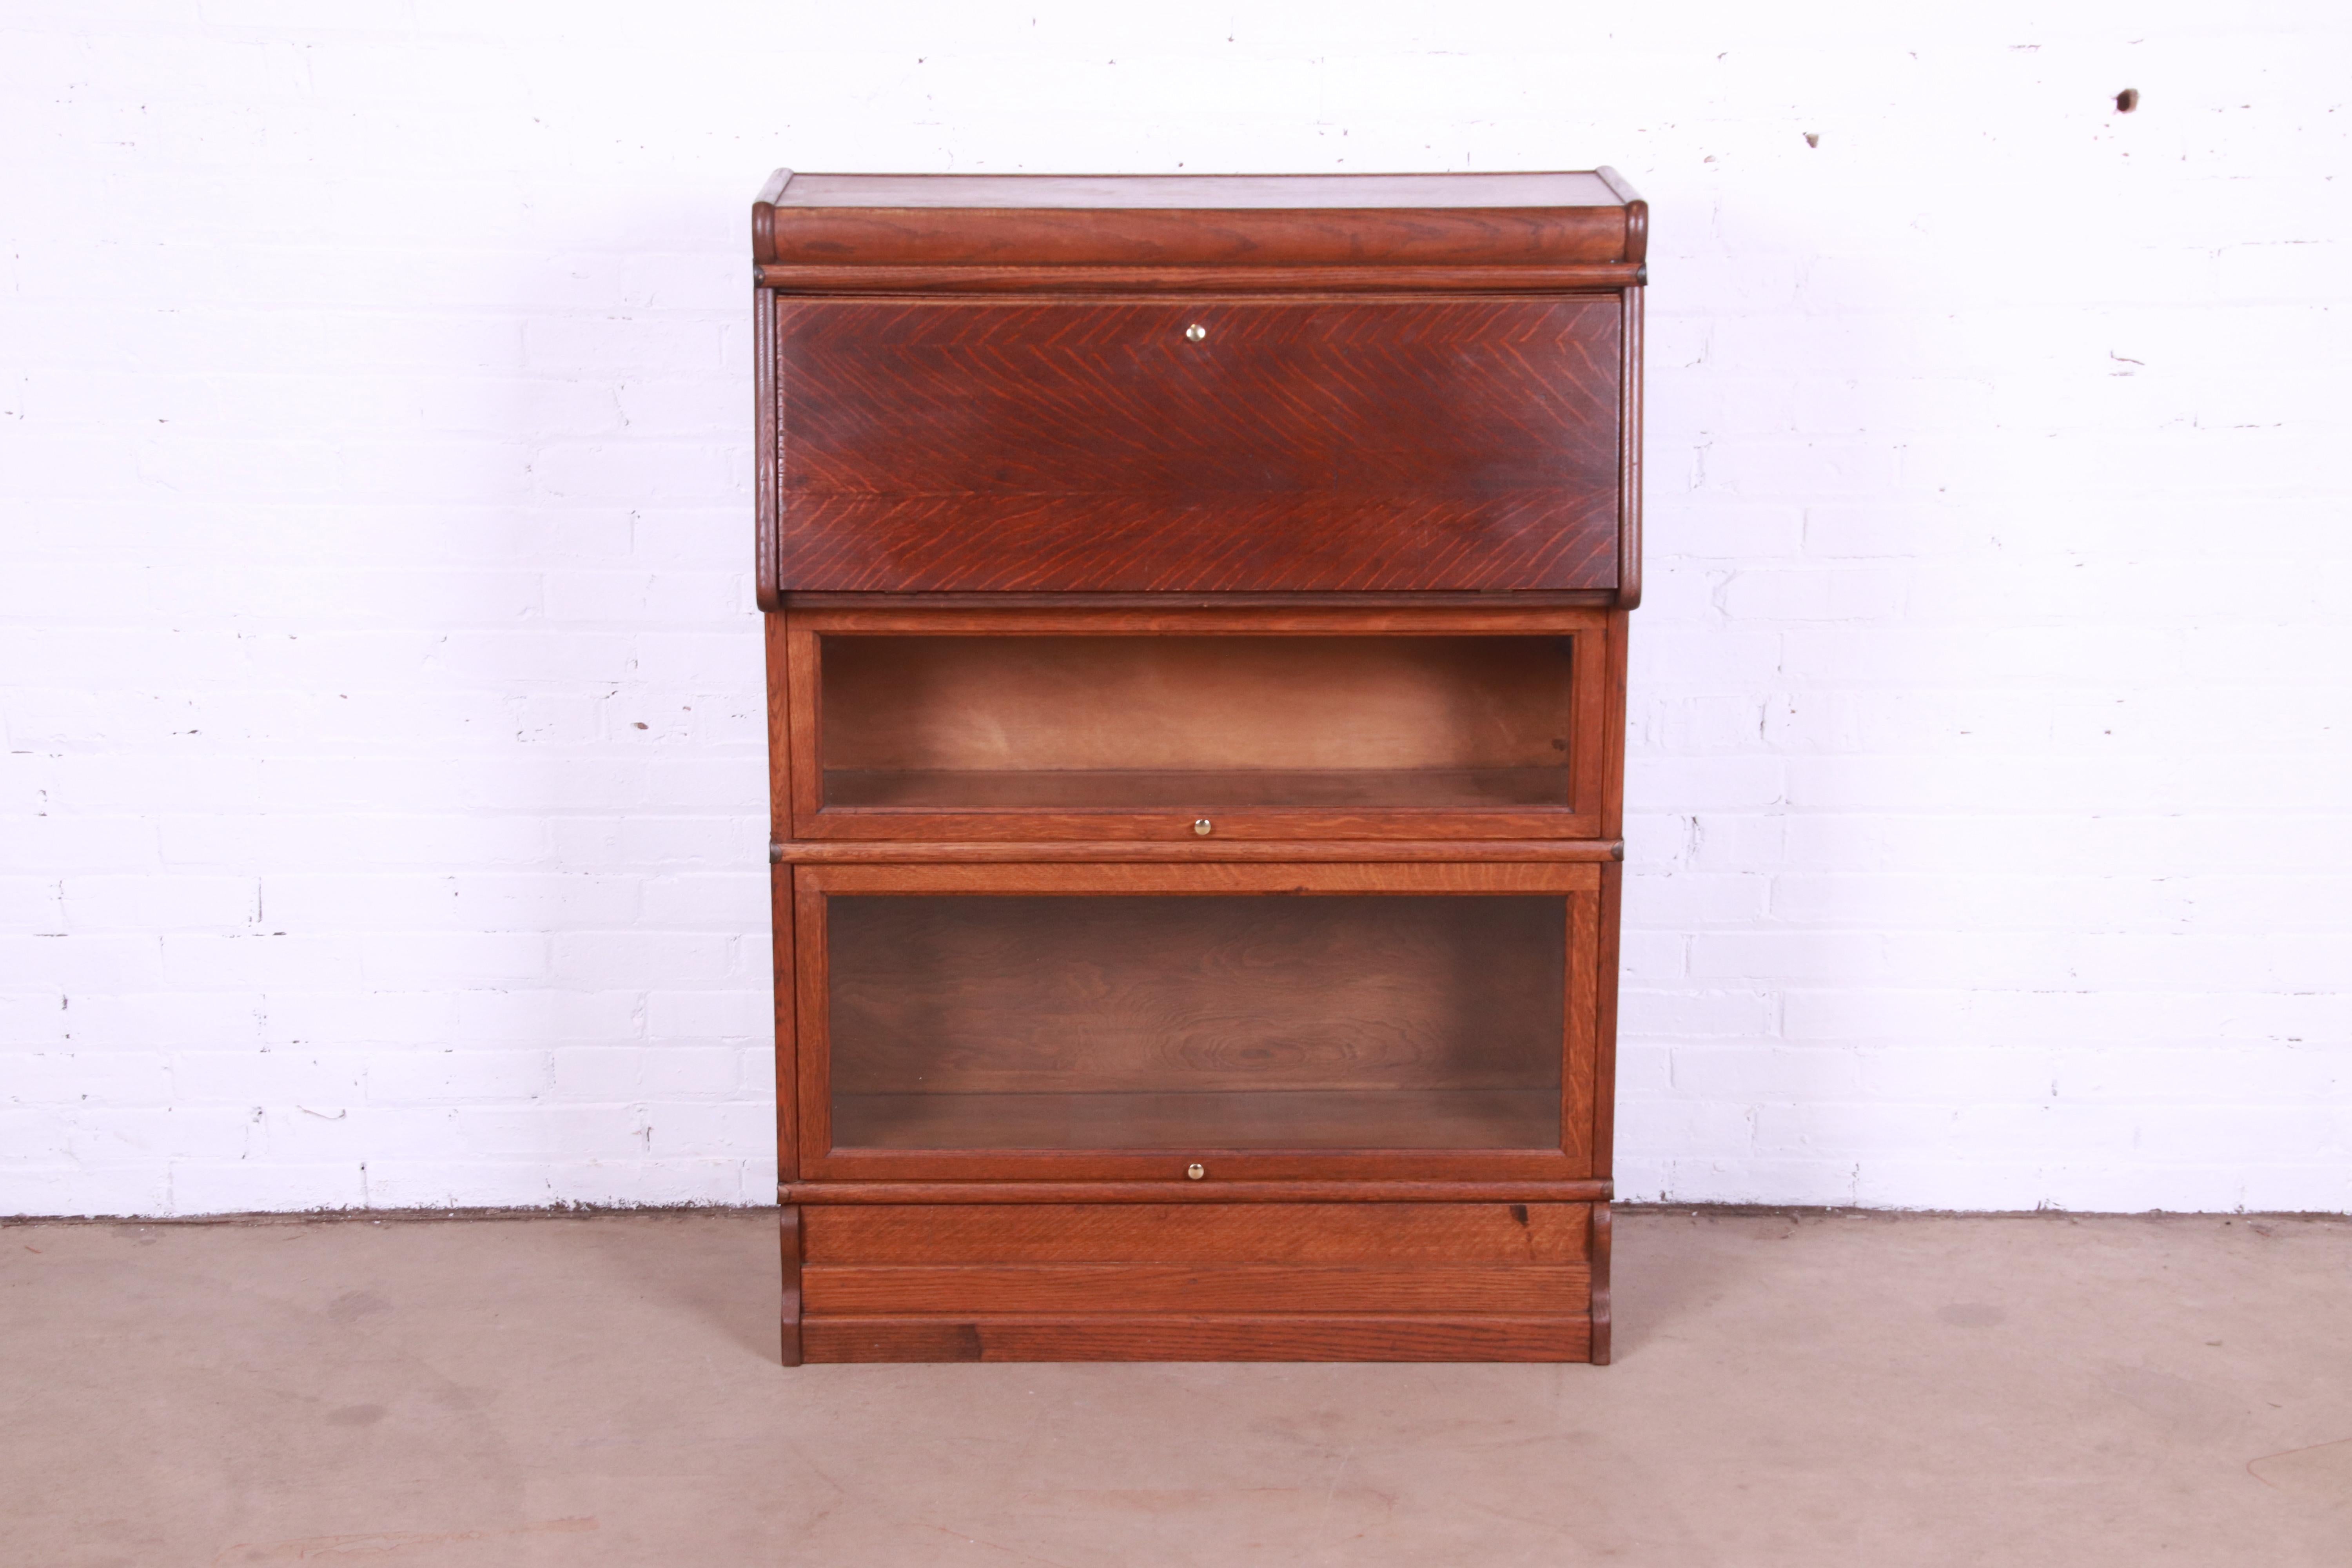 A gorgeous antique Arts & Crafts barrister bookcase with fall front secretary desk

Recently procured from Frank Lloyd Wright's DeRhodes House

Attributed to Globe Wernicke

USA, Circa 1920s

Quarter sawn oak, with glass front doors and